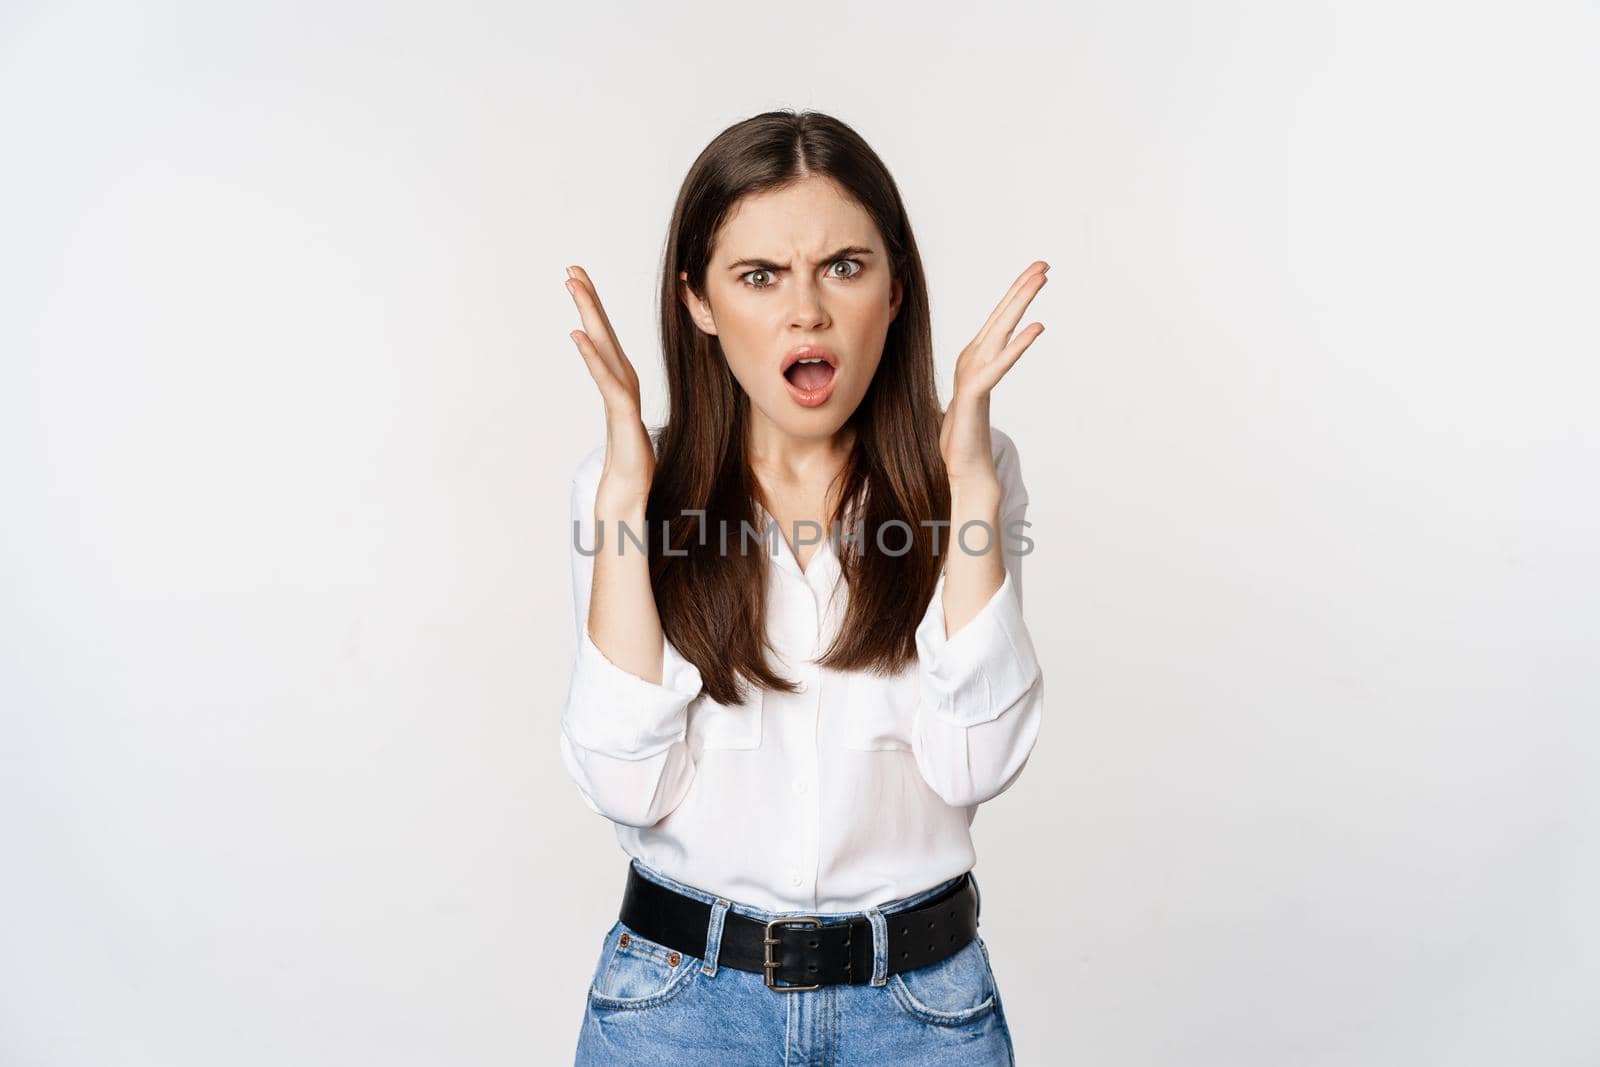 Frustrated and angry young woman gasping, looking shocked and upset at camera, offended by smth, standing bothered against white background.